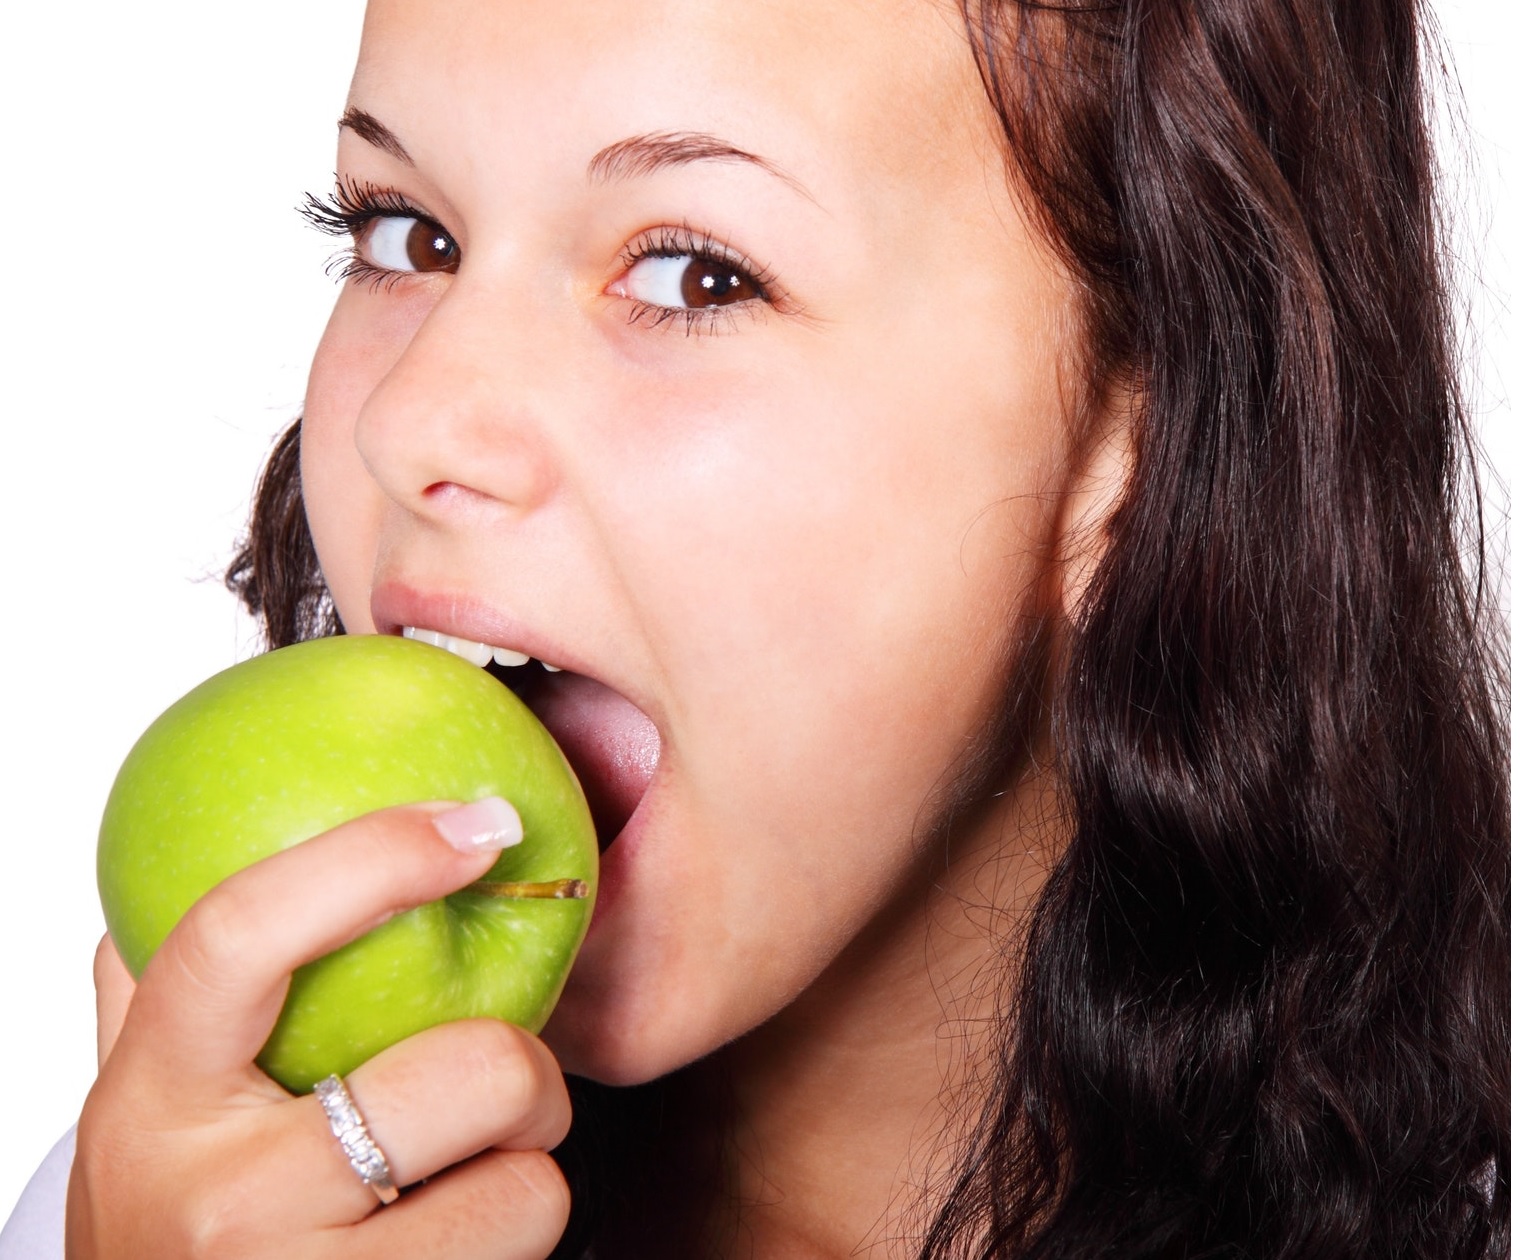 young girl eating a green apple